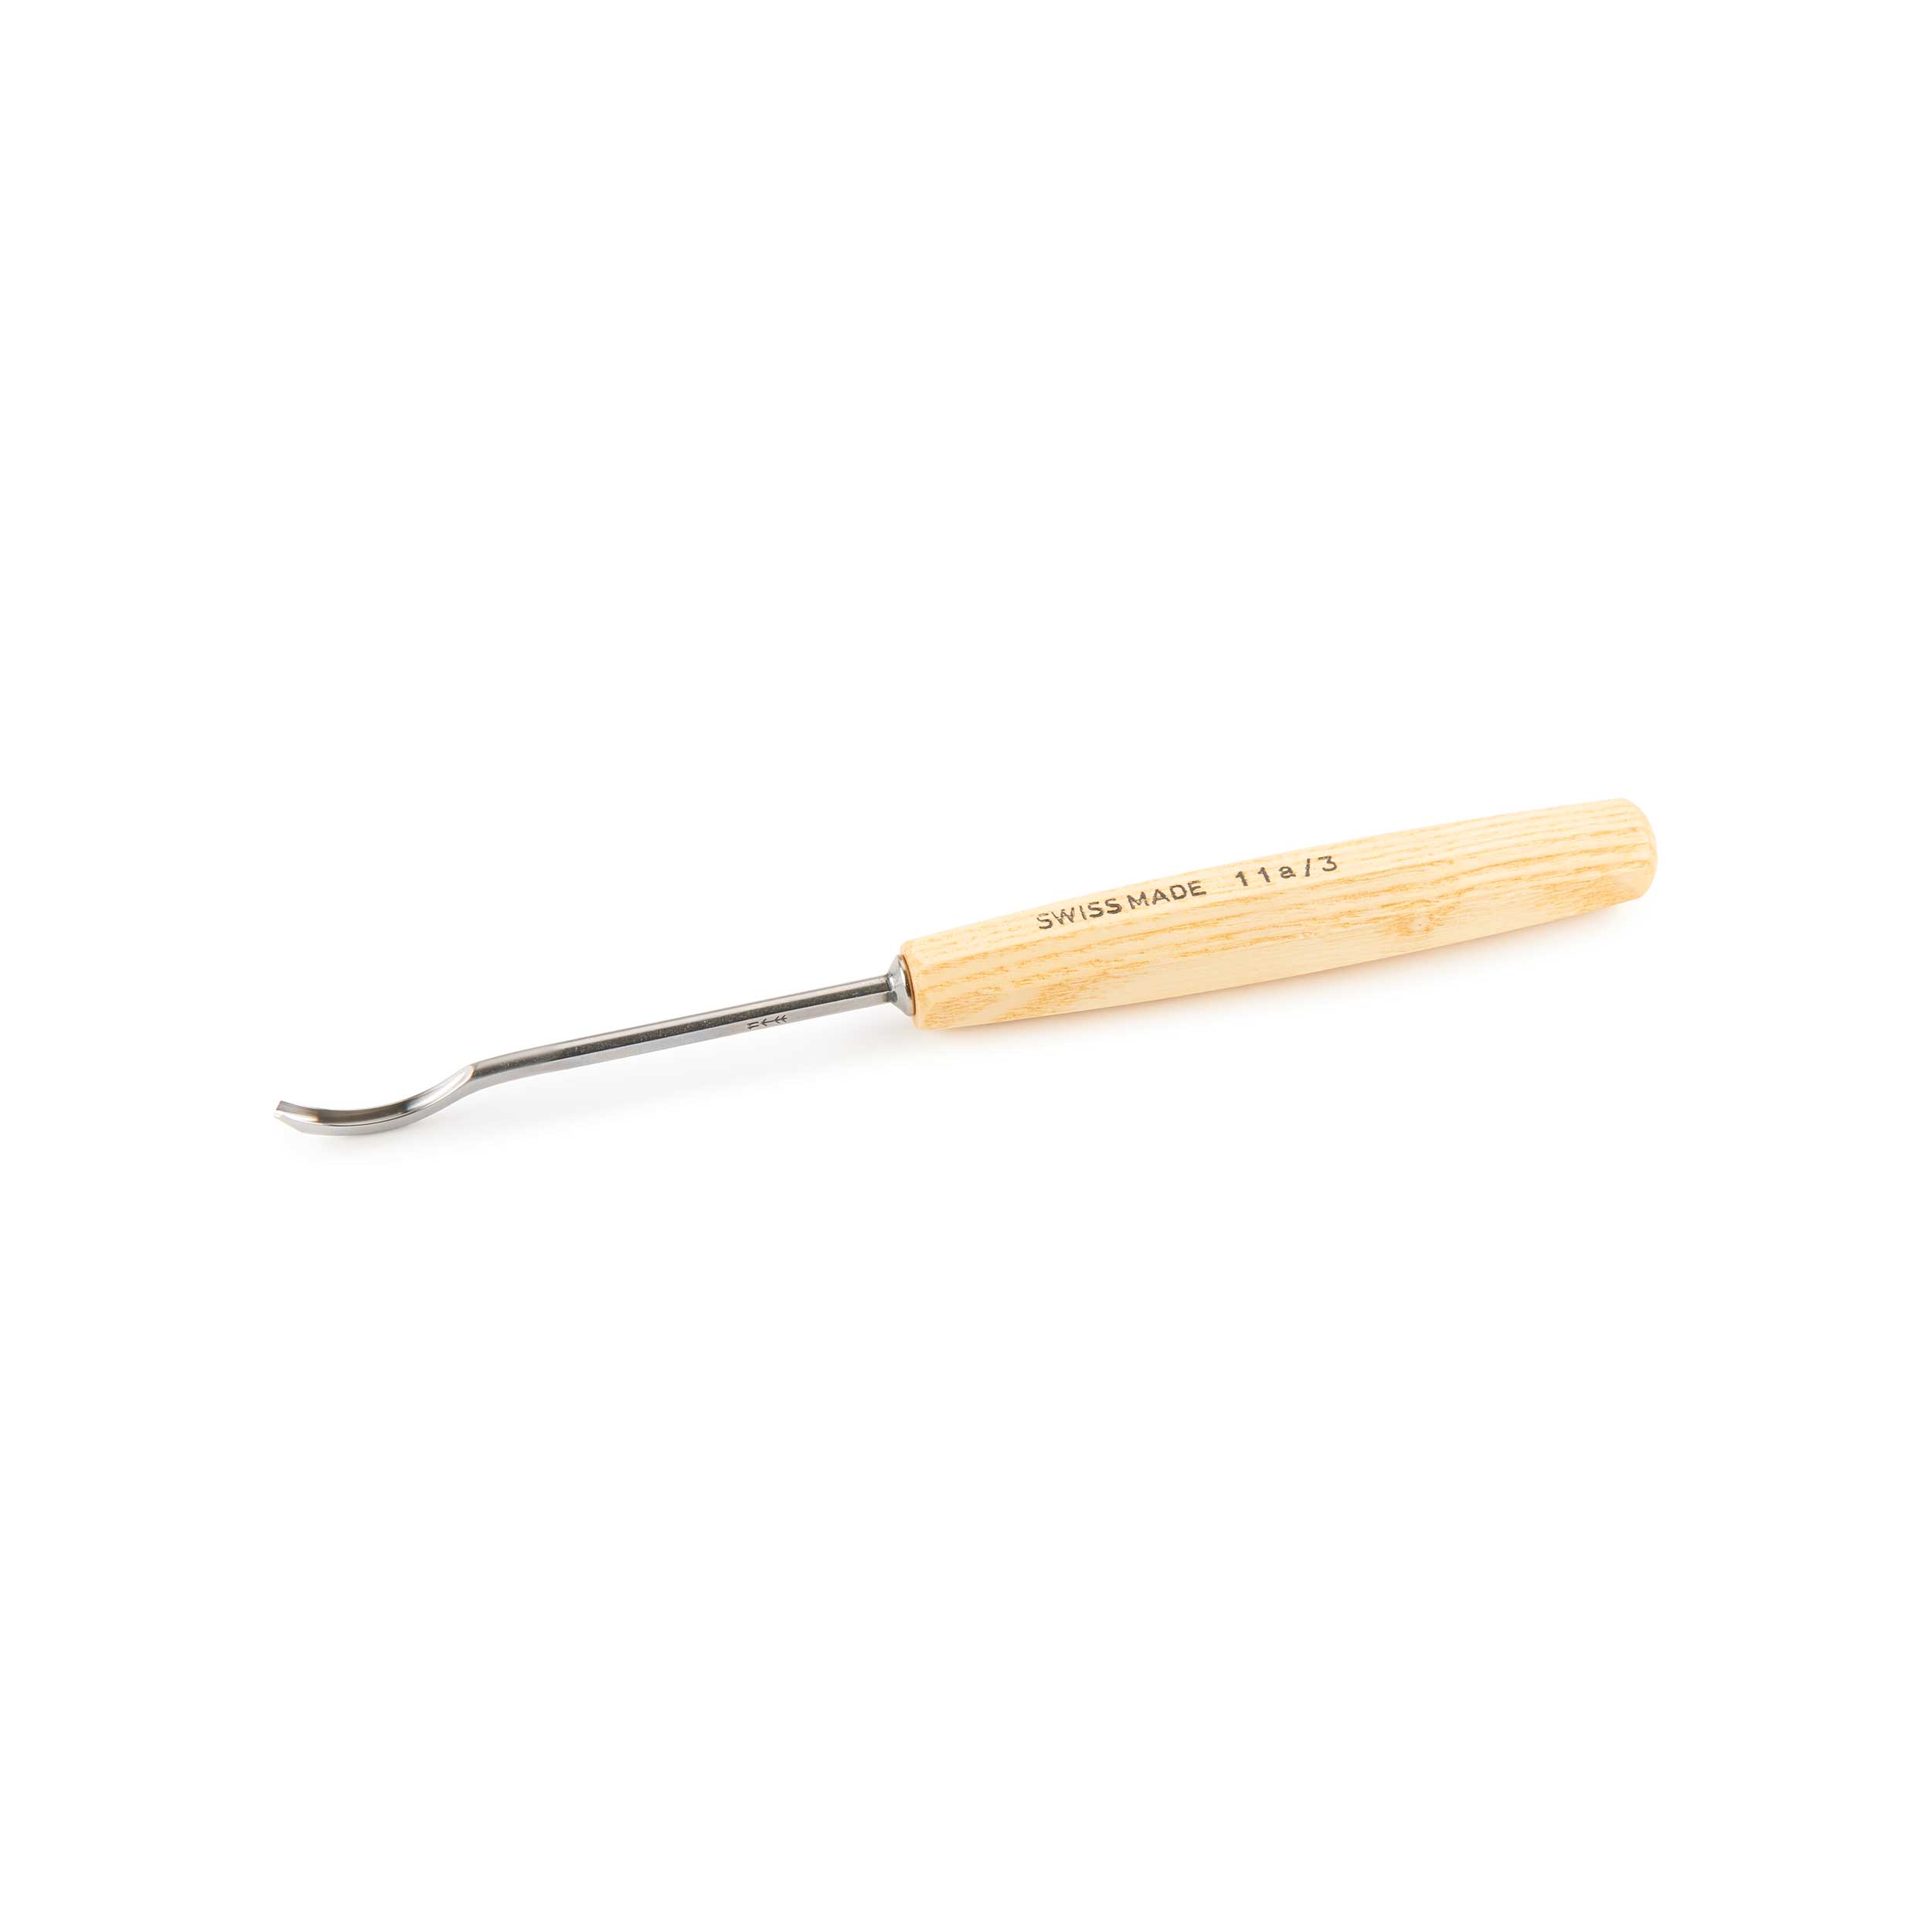 #11 Sweep Spoon Gouge 3 Mm, Full Size